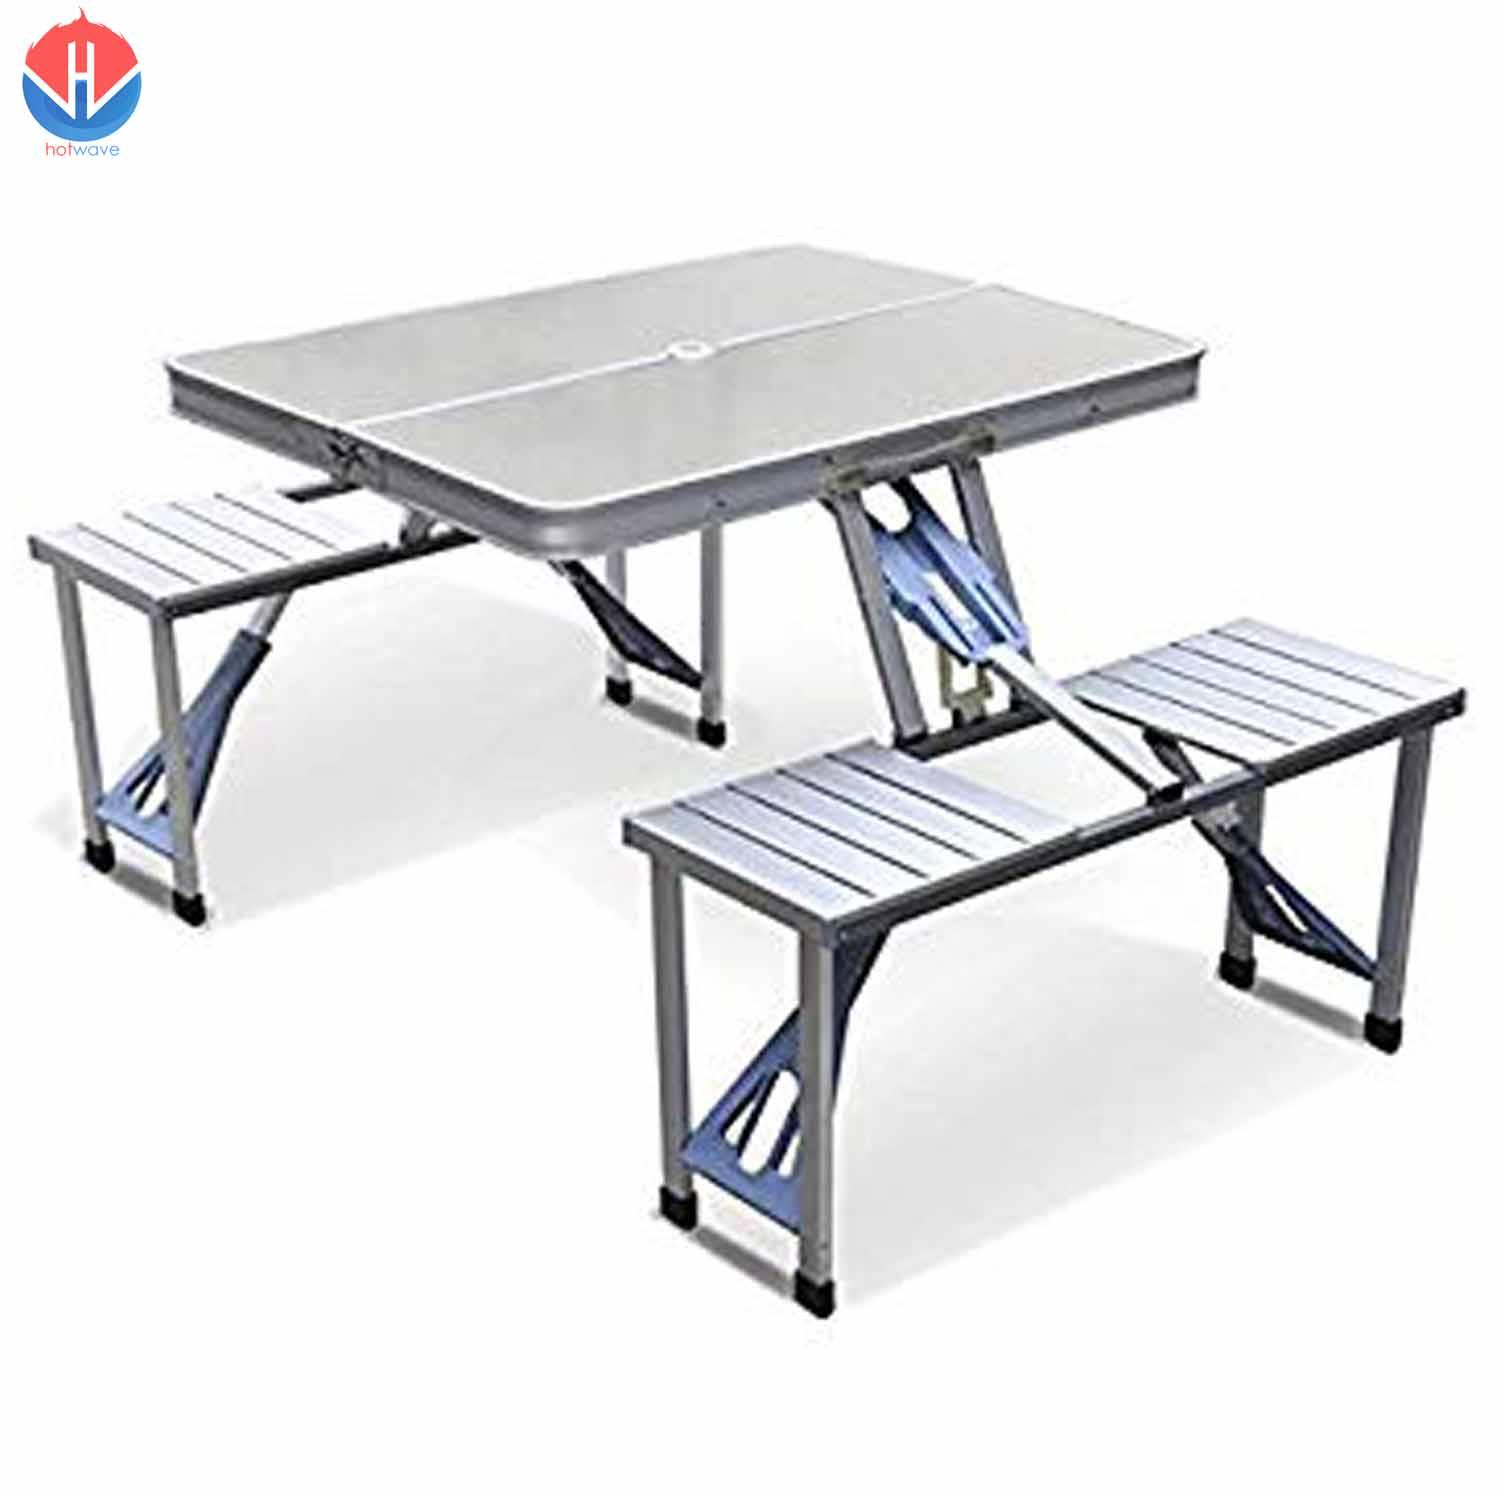 Folding Picnic Table And Chairs The Range â¢ Display Cabinet